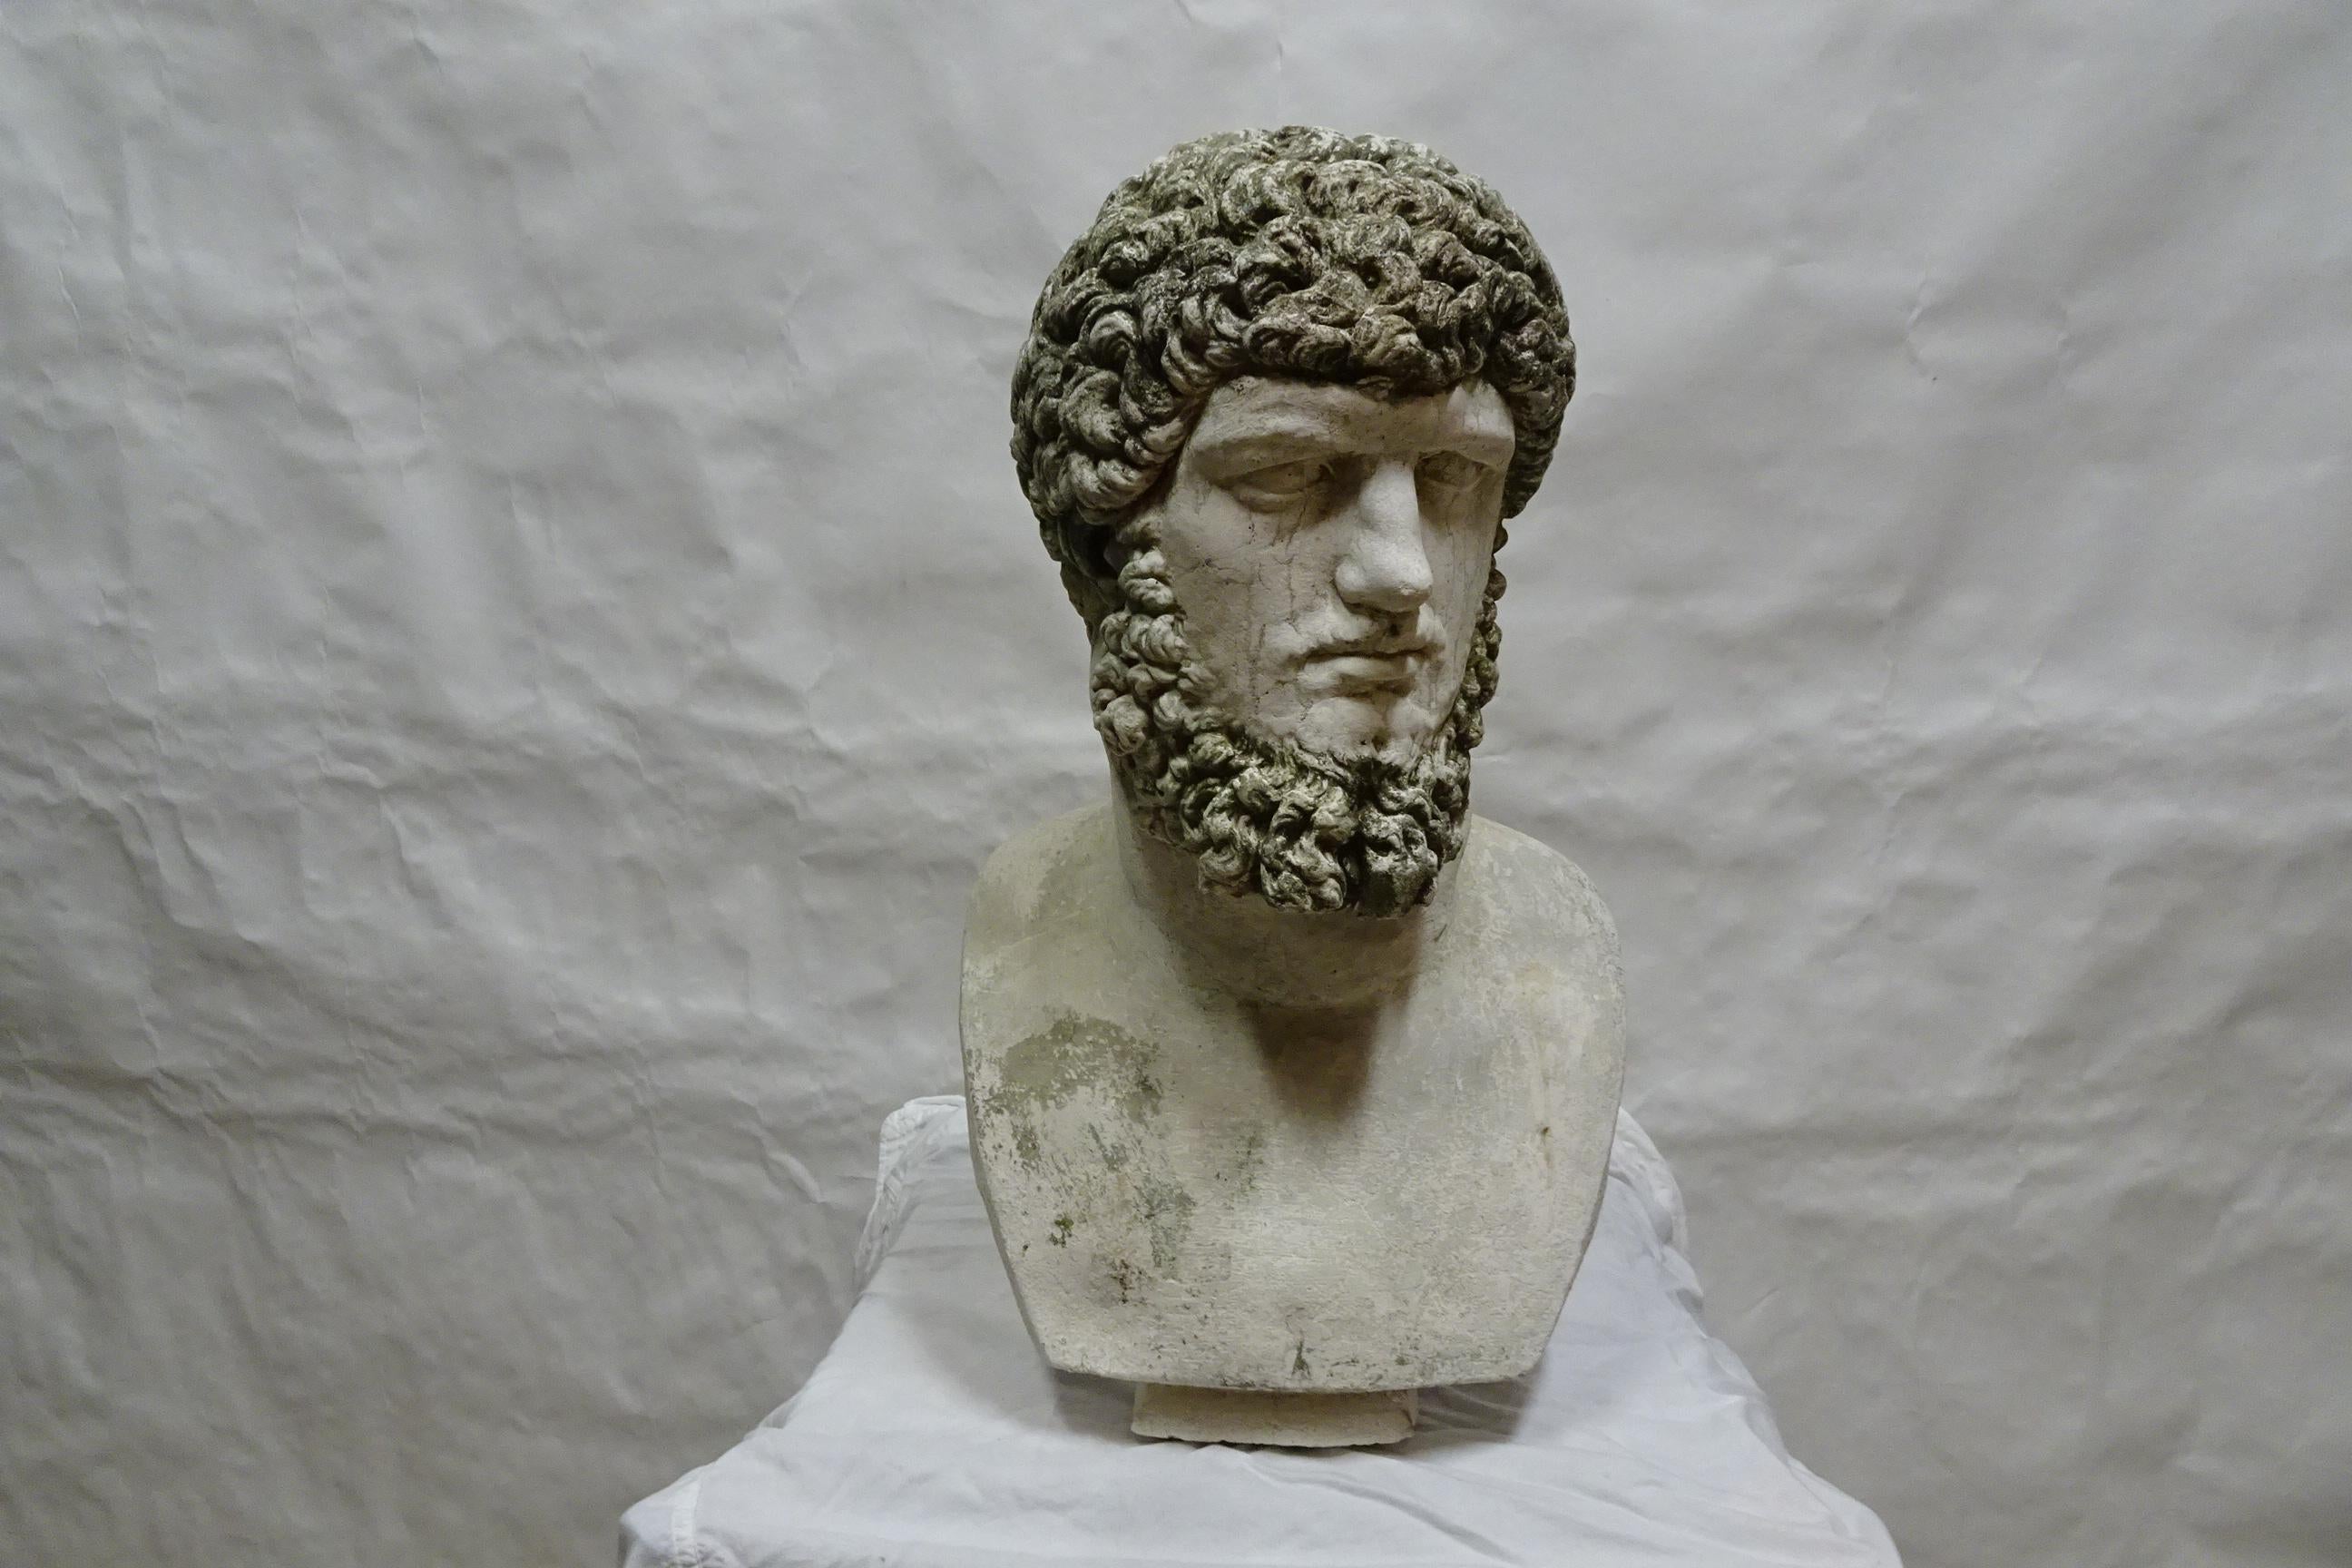 This is a unique Bust of Roman Emperor Lucius Aurelius Verus. the hair and beard is covered in Green Algae.